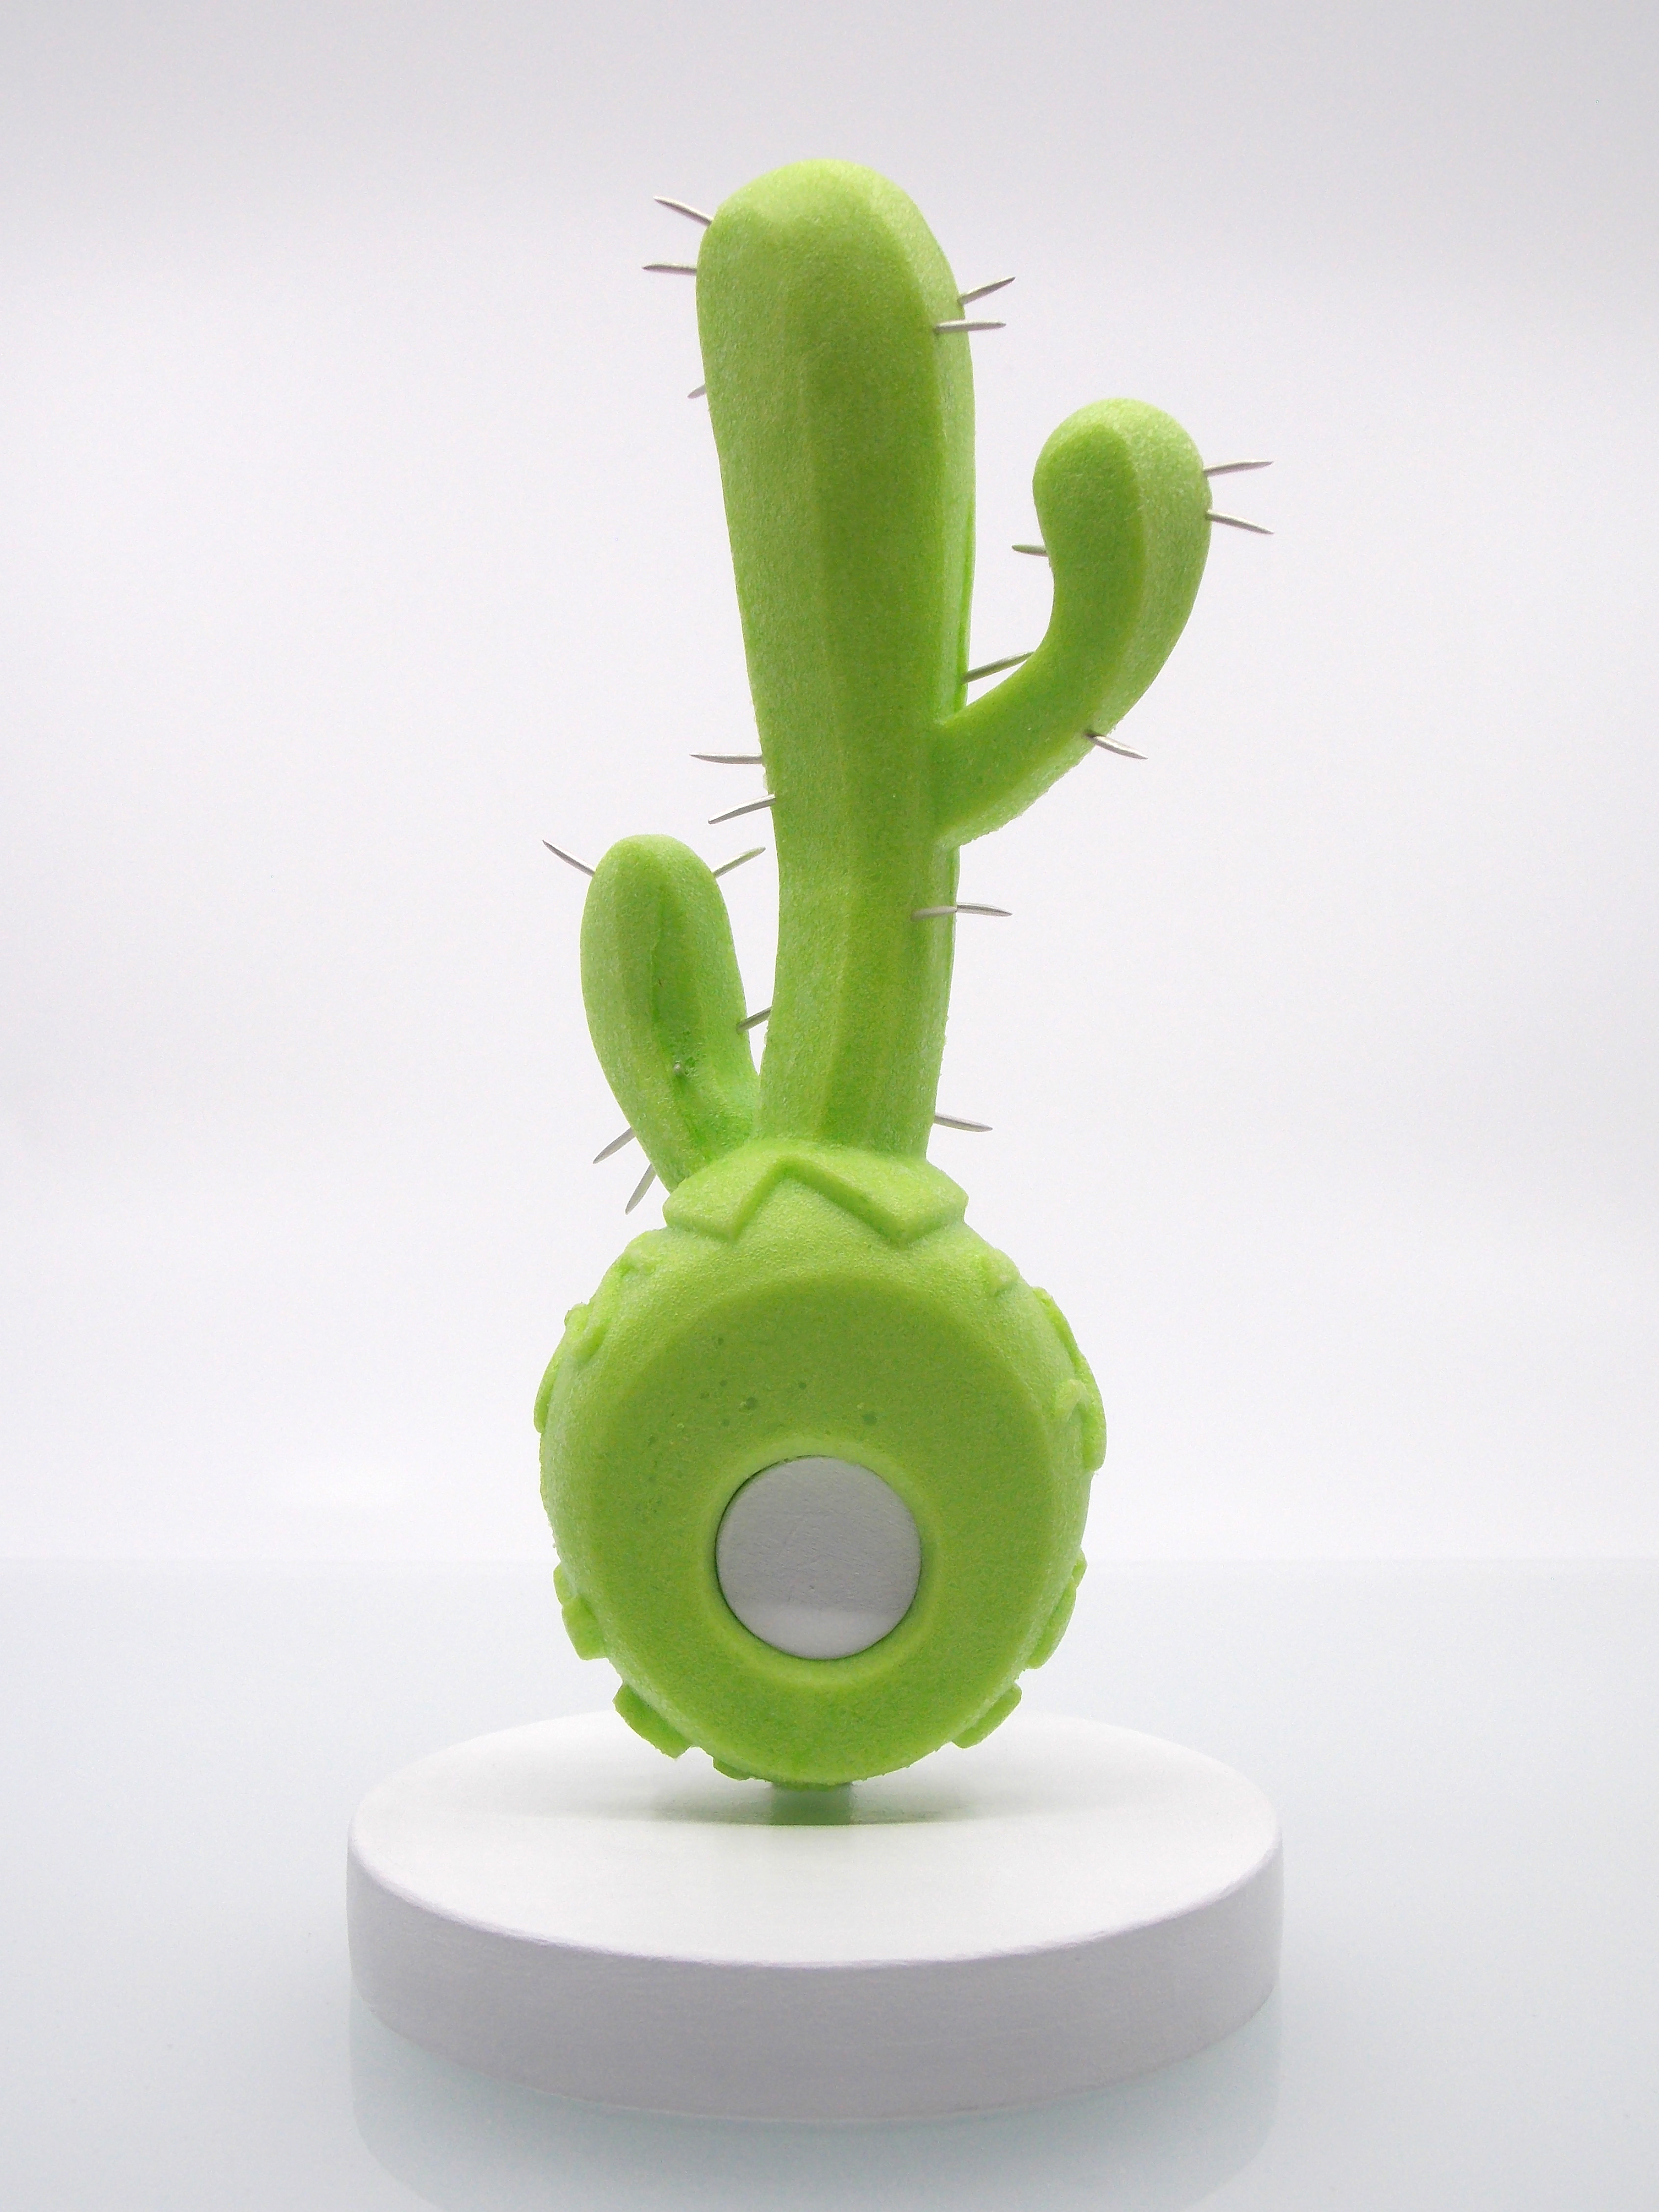 Image of Justin Scroggins' work titled 'It's a Cactus'